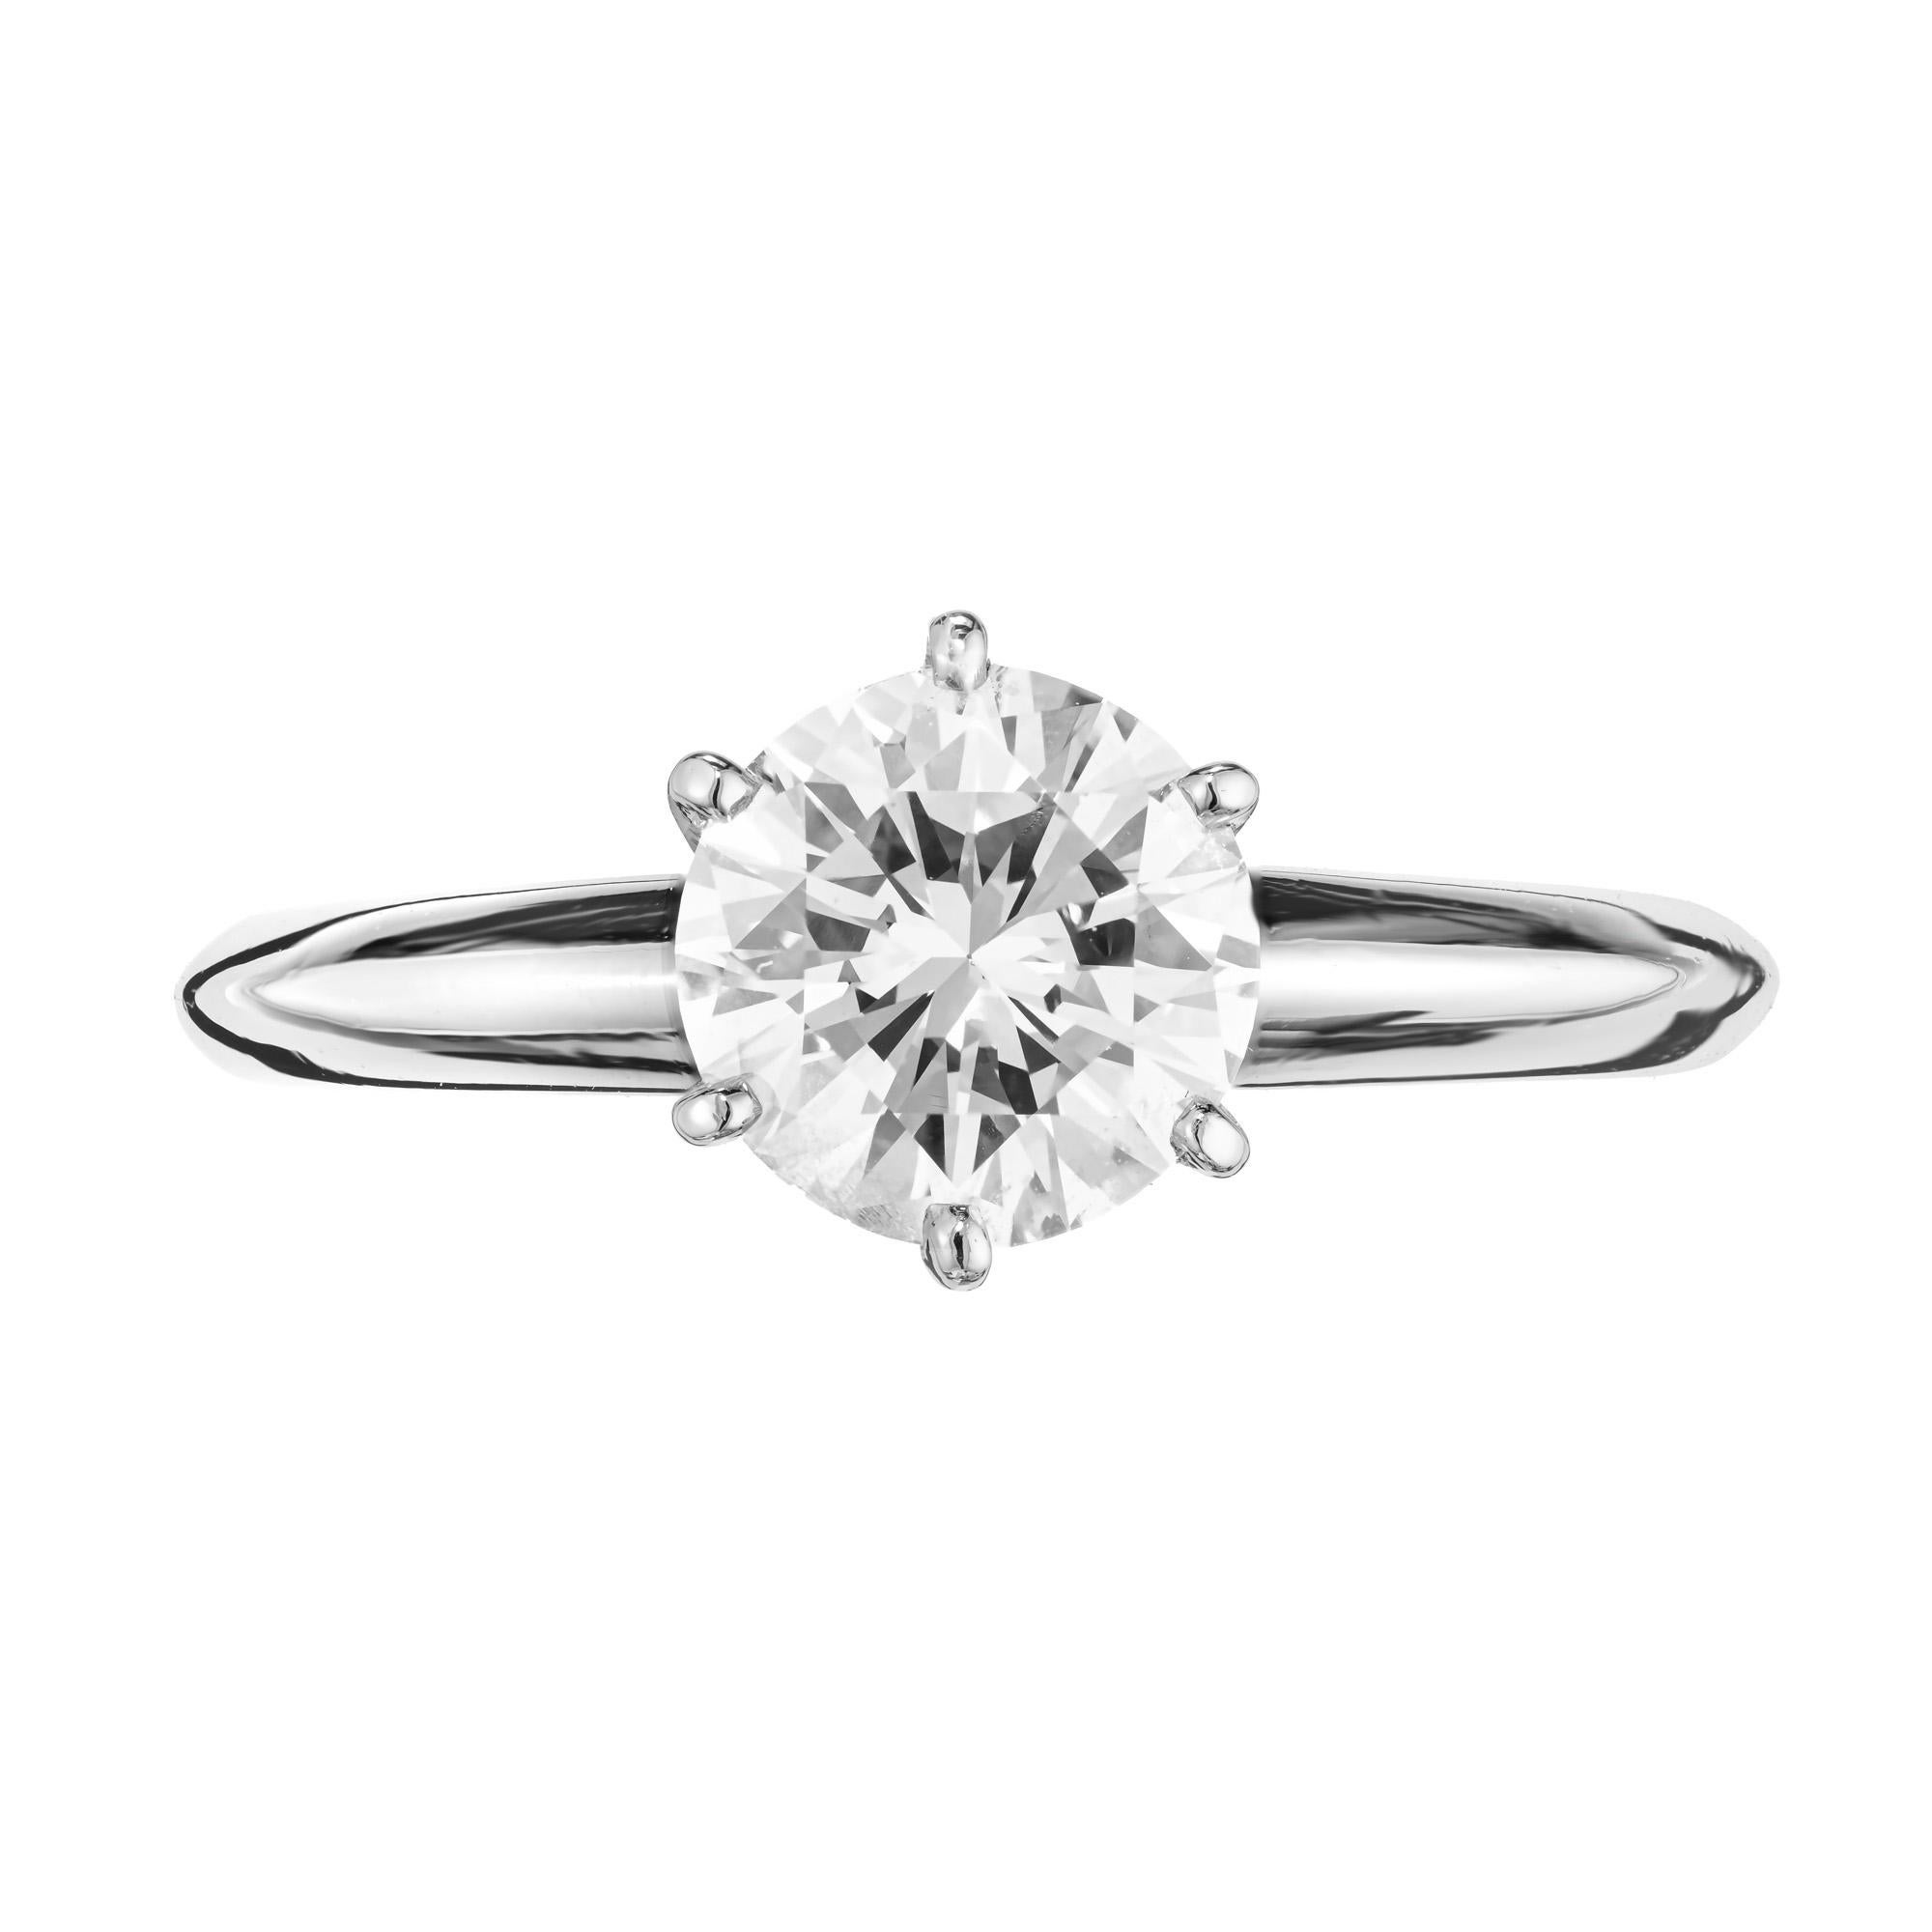 Solitaire diamond engagement ring. EGL certified 1.41ct round brilliant cut diamond in a platinum 6 prong setting. 

1 round brilliant cut diamond, I SI approx. 1.41cts
Size: 6.5 and sizable
Platinum 
Stamped: Plat
5.9 grams
Width at top: